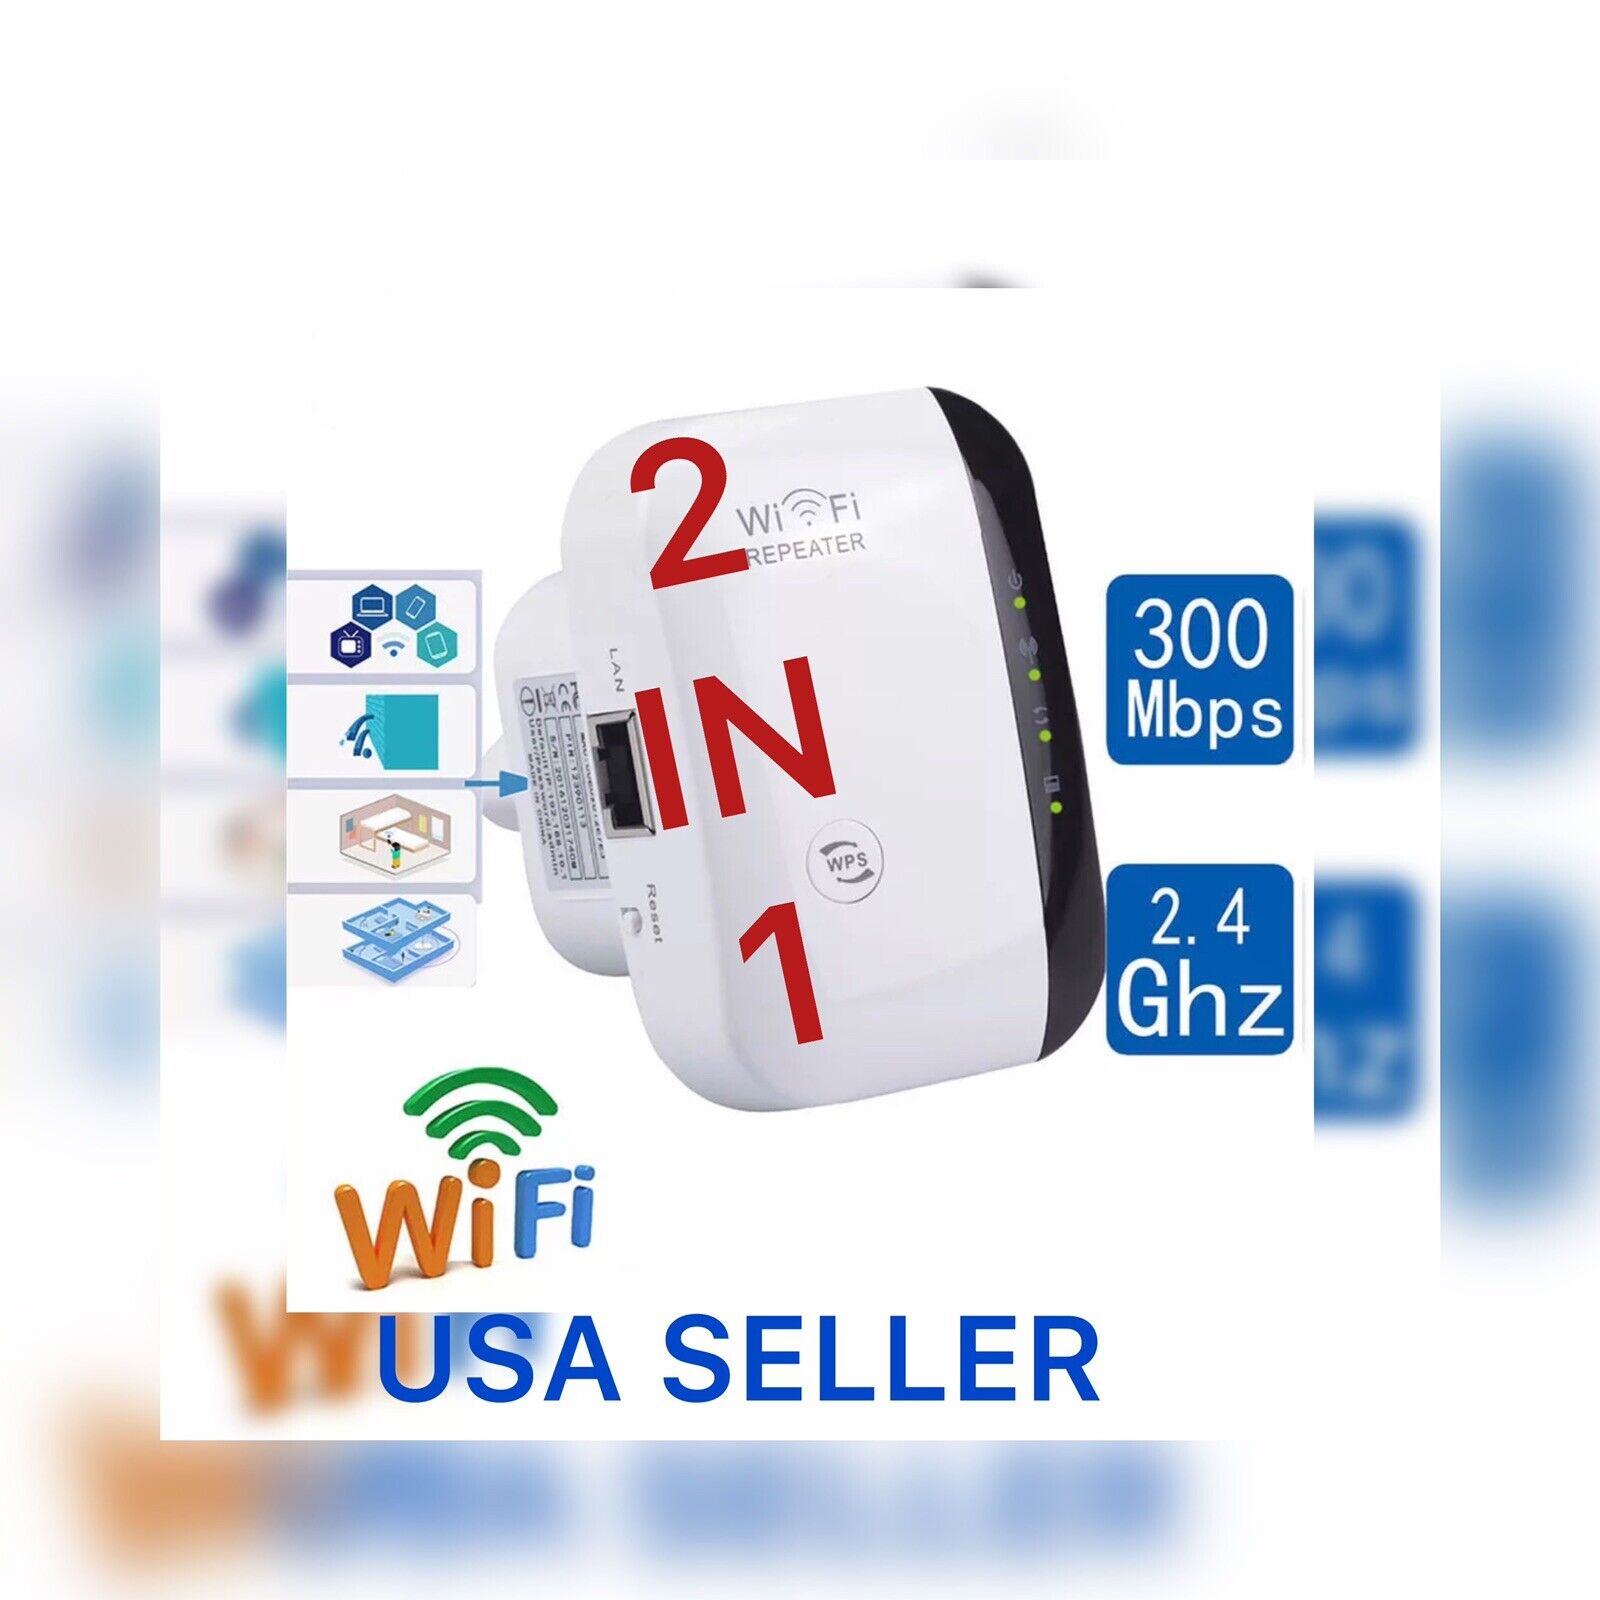 WIFI REPEATER EXTENDER SIGNAL WIRELESS-N 80211 AP ROUTER ( USA SELLER ) 300Mbps✅